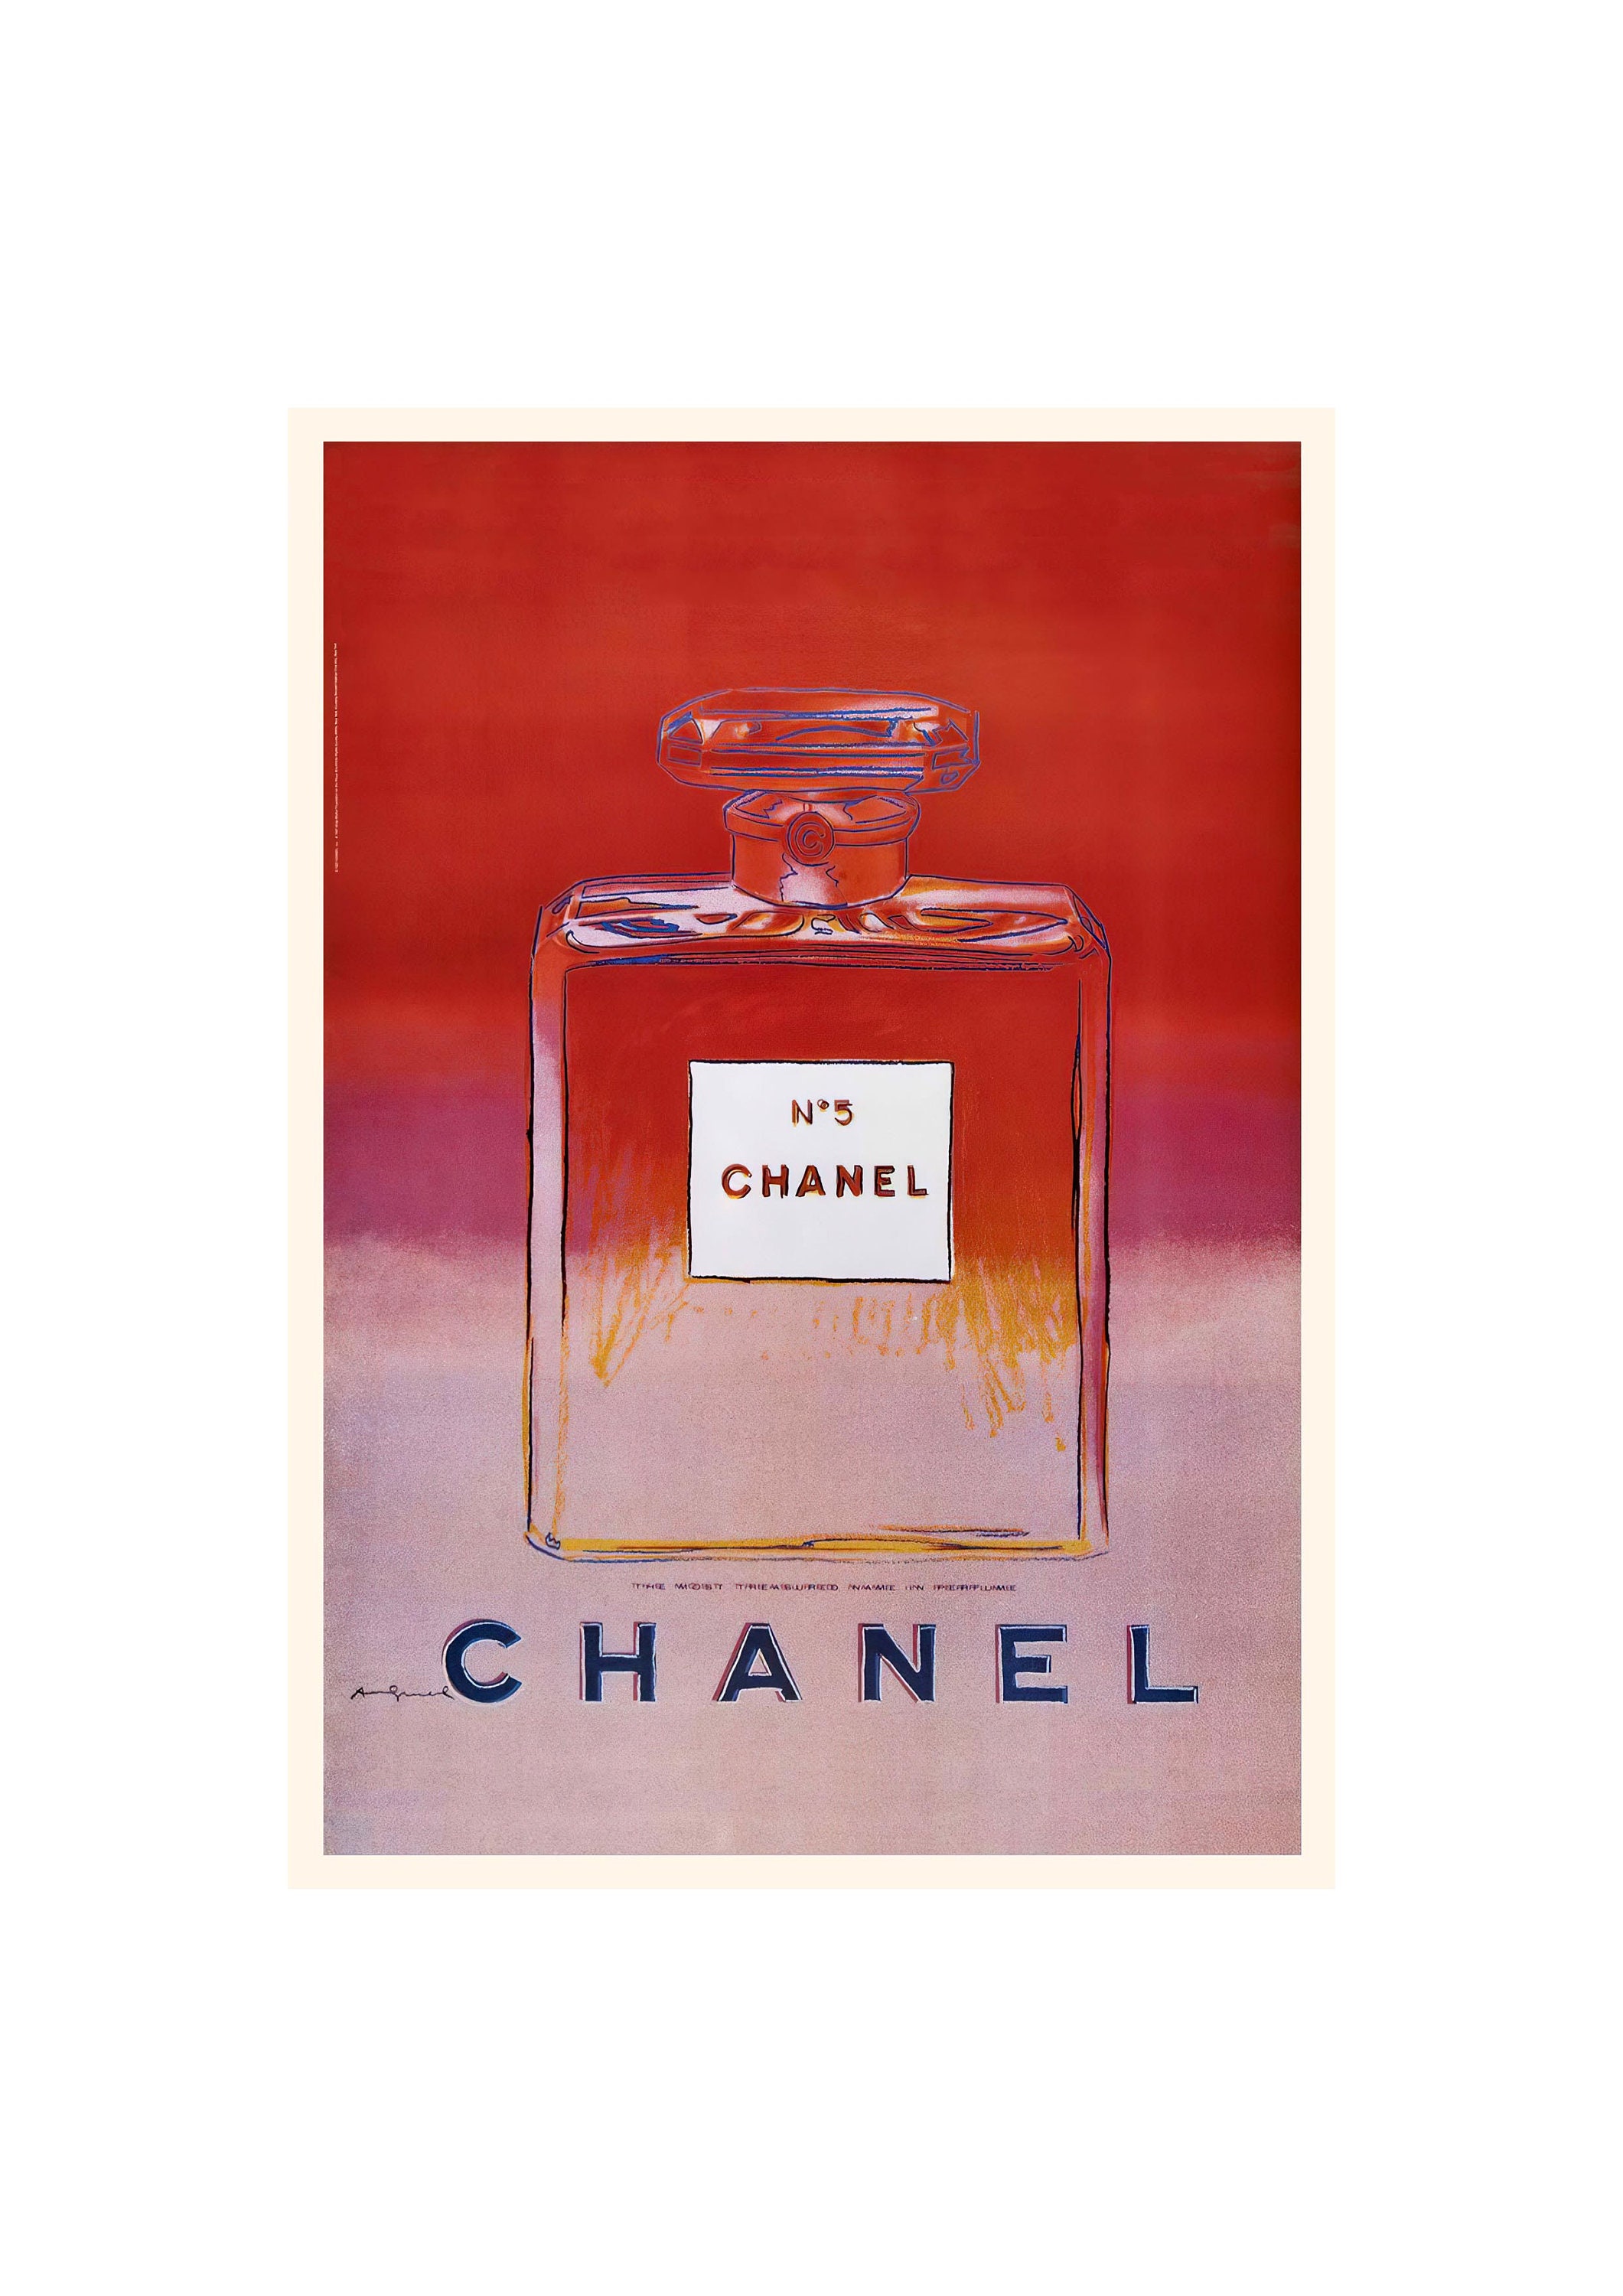 12a ANDY WARHOL CHANEL No5 POSTER GREEN AND BLUE.